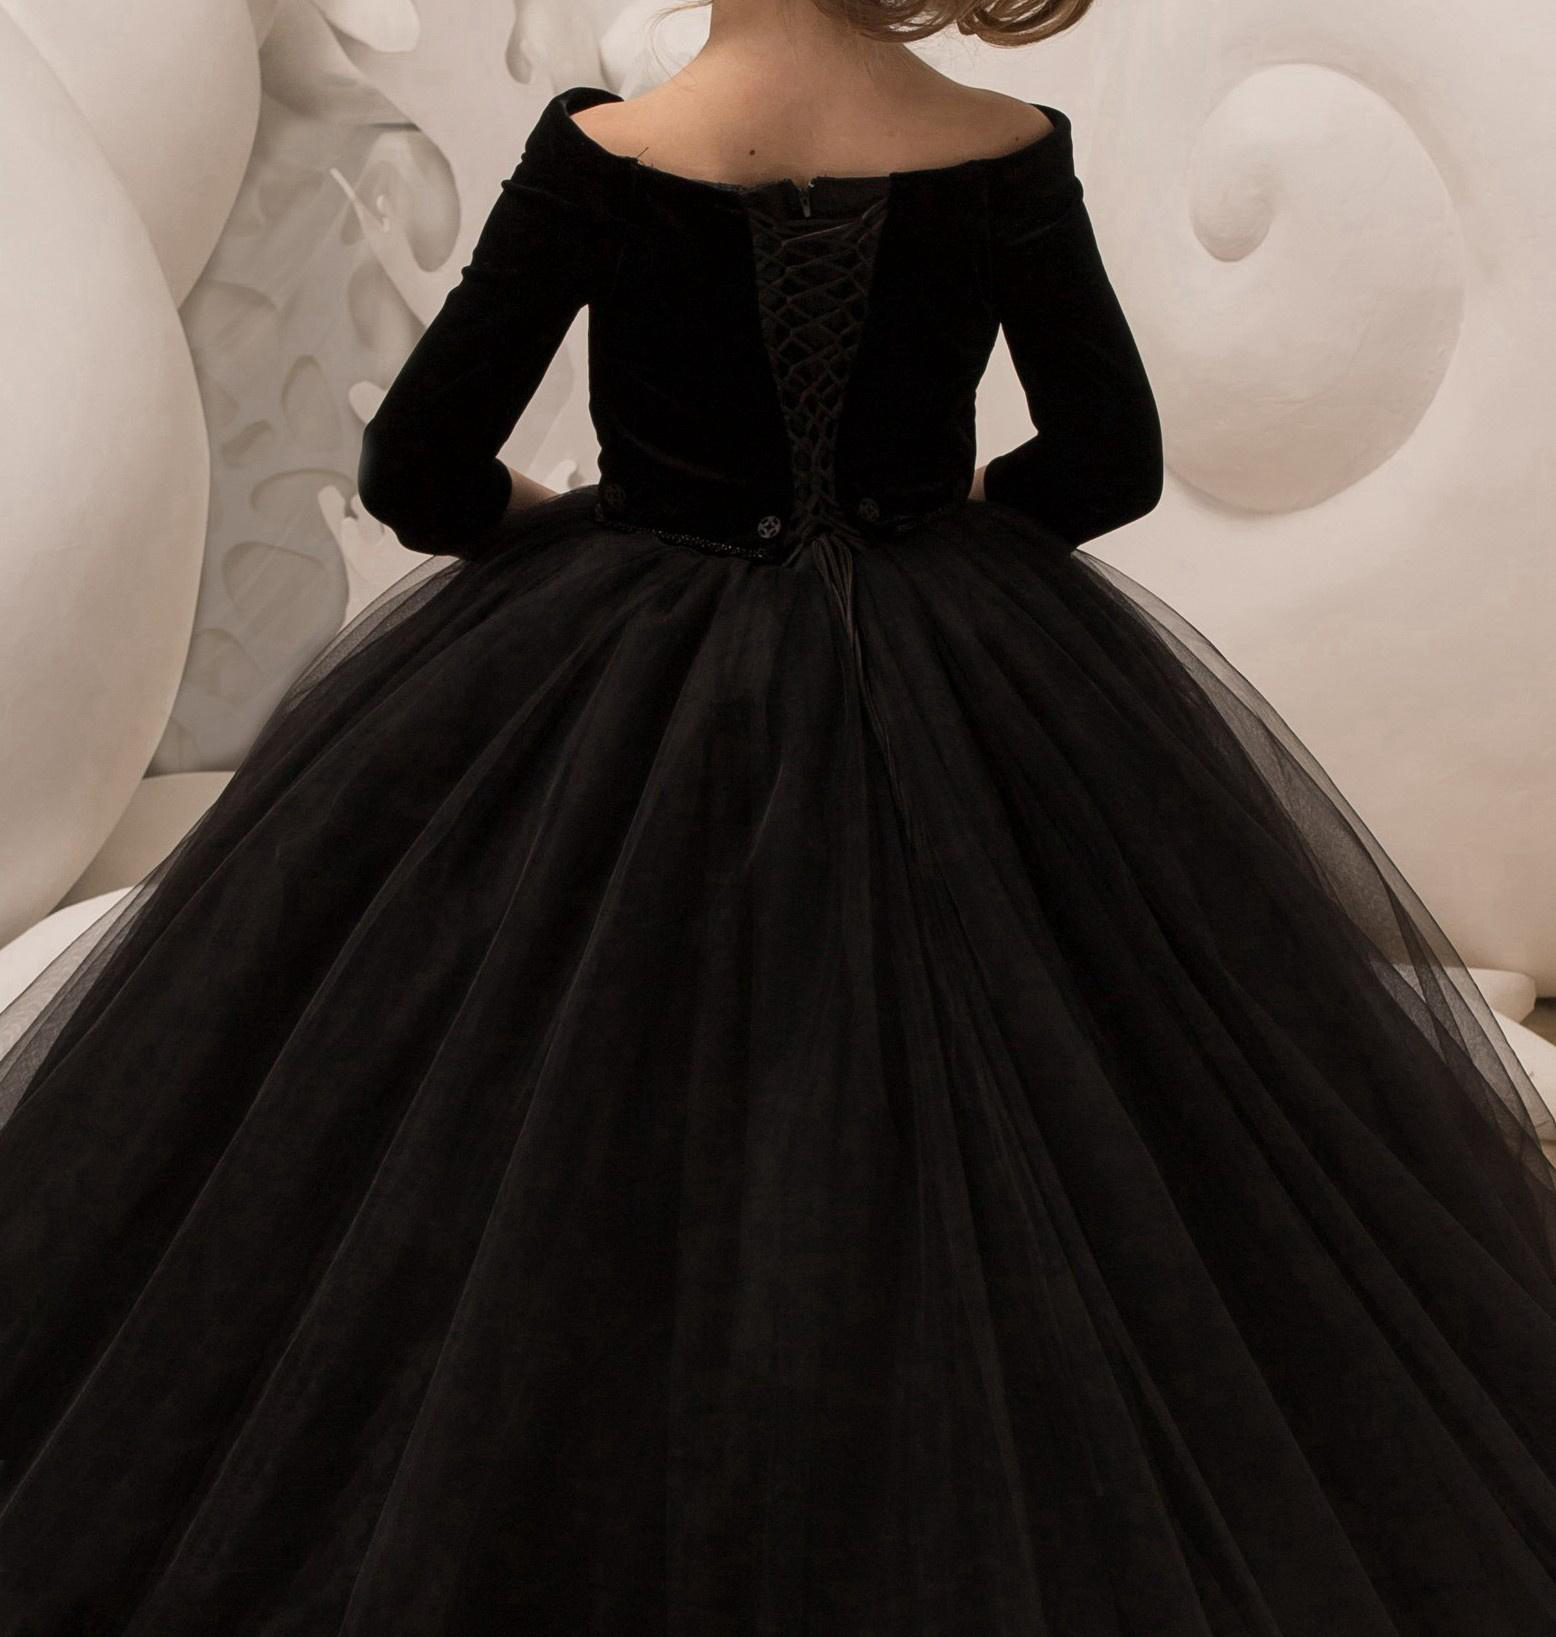 Black Princess Ball Gown Kids Pageant Dress with Elegant Half Sleeves for Girls Aged 5 -14 Years Girl Dresses